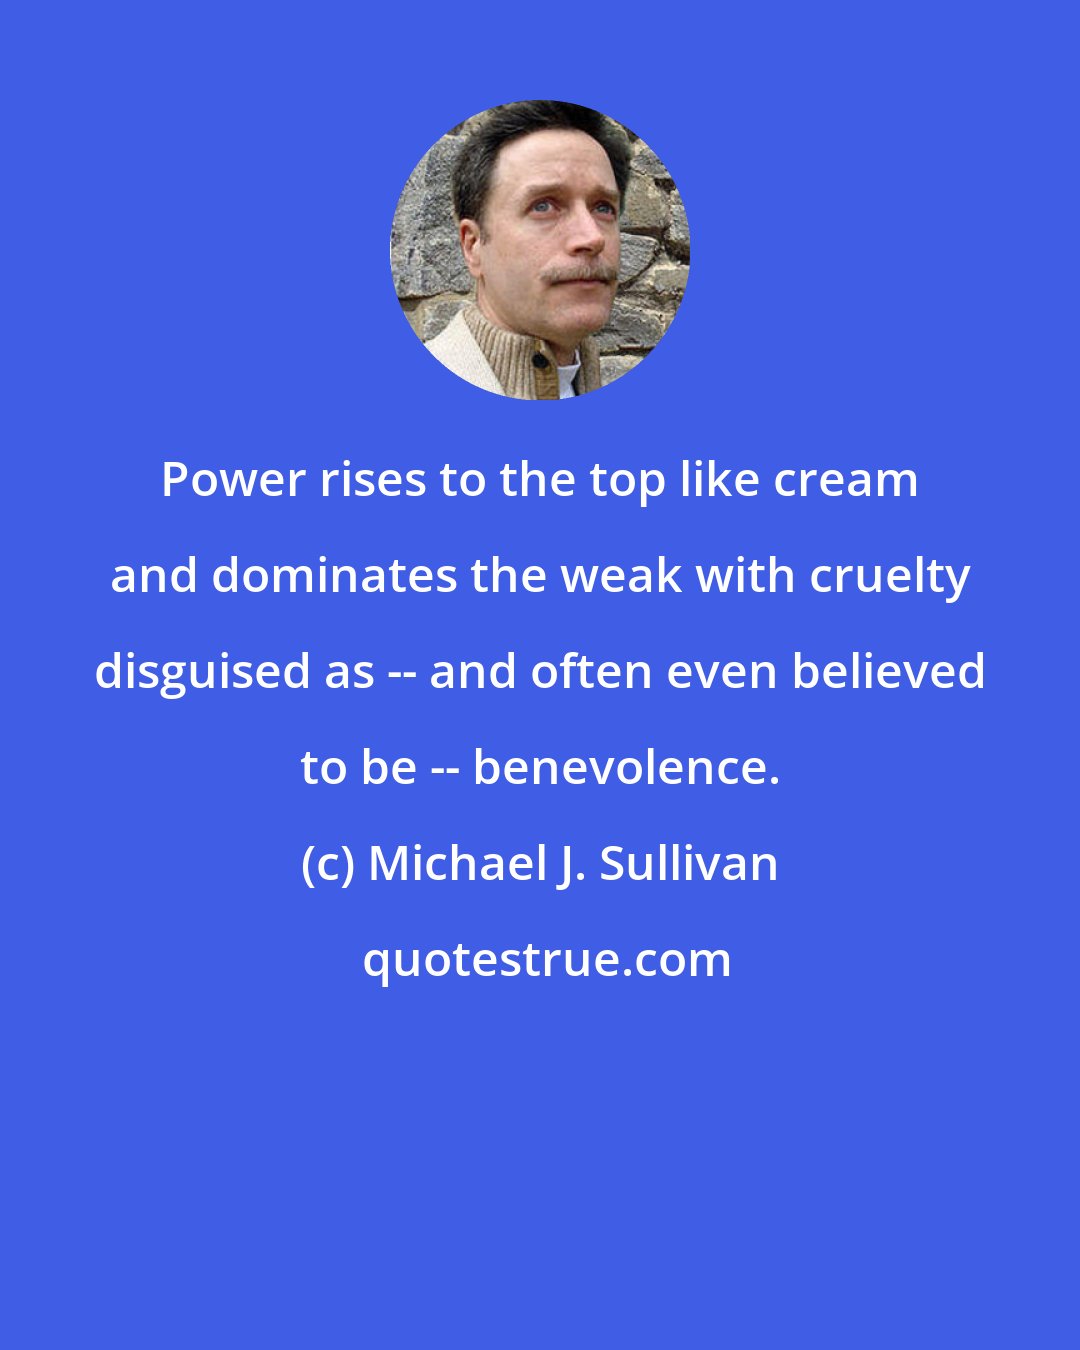 Michael J. Sullivan: Power rises to the top like cream and dominates the weak with cruelty disguised as -- and often even believed to be -- benevolence.